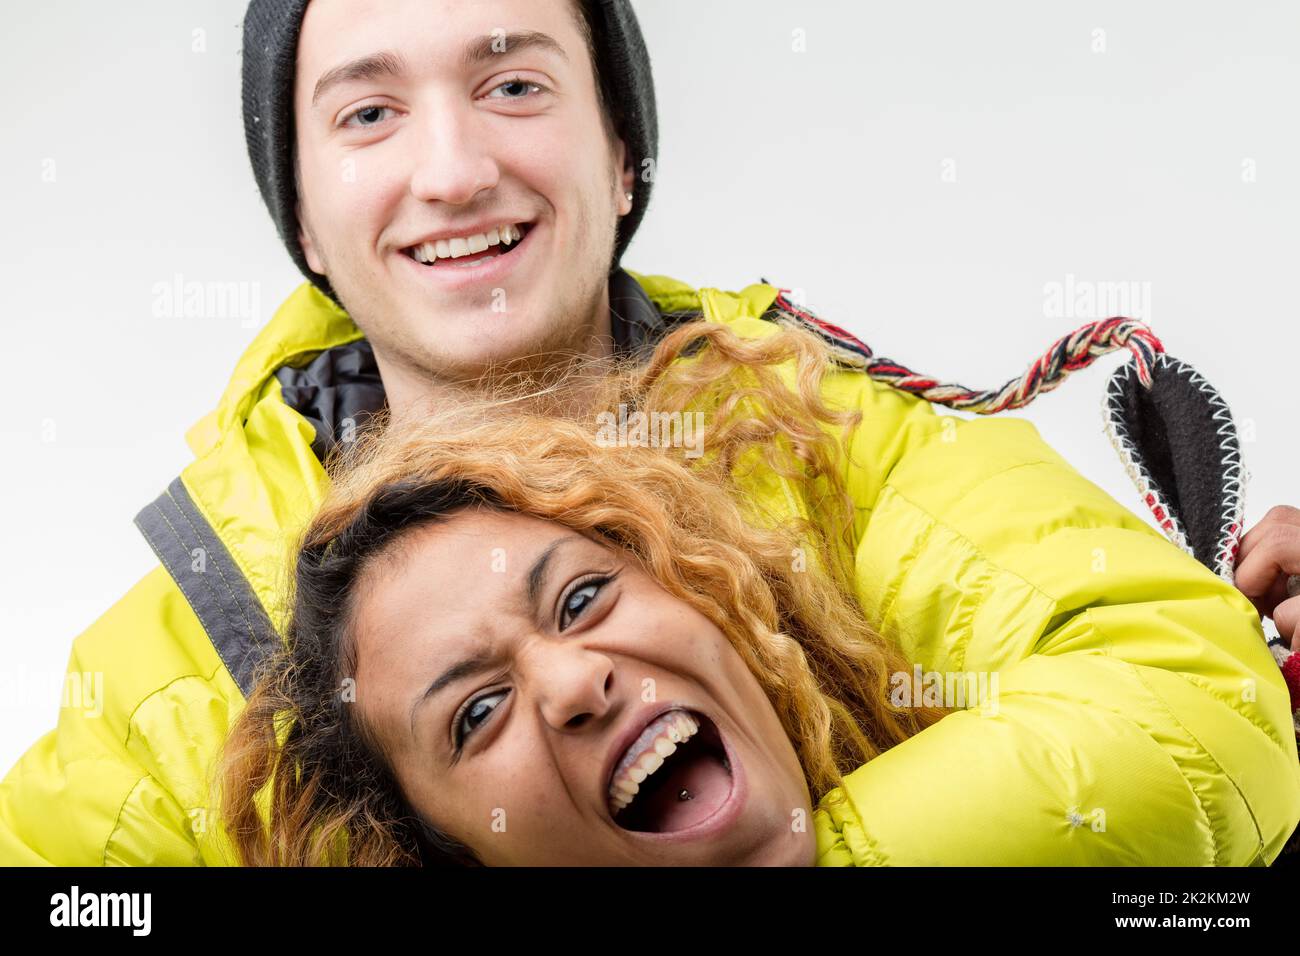 white boy and black girl joking at a party Stock Photo